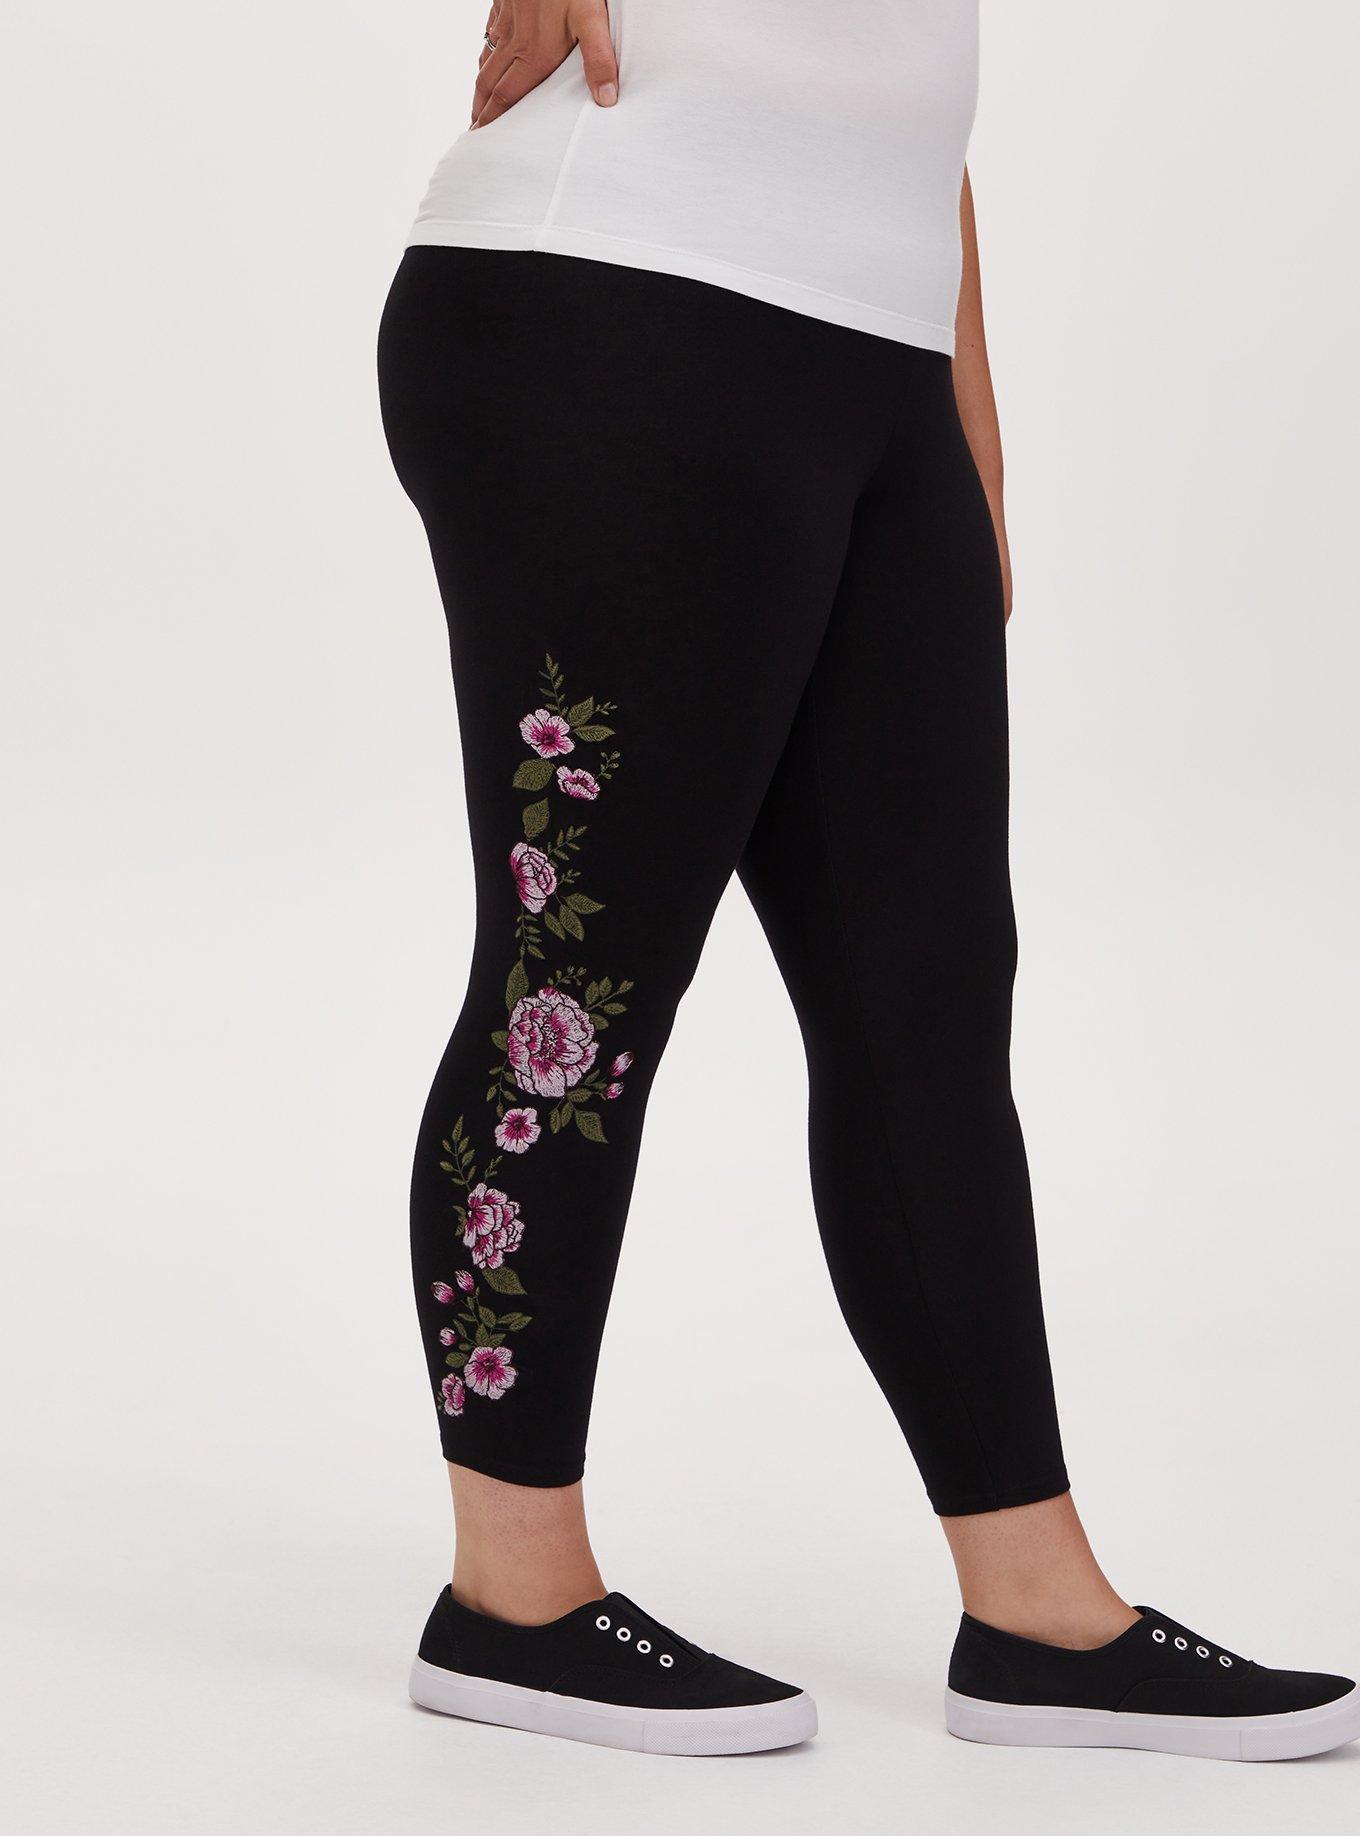 Miracle Cotton Leggings Price: 399/- Type: Embroidered Leggings